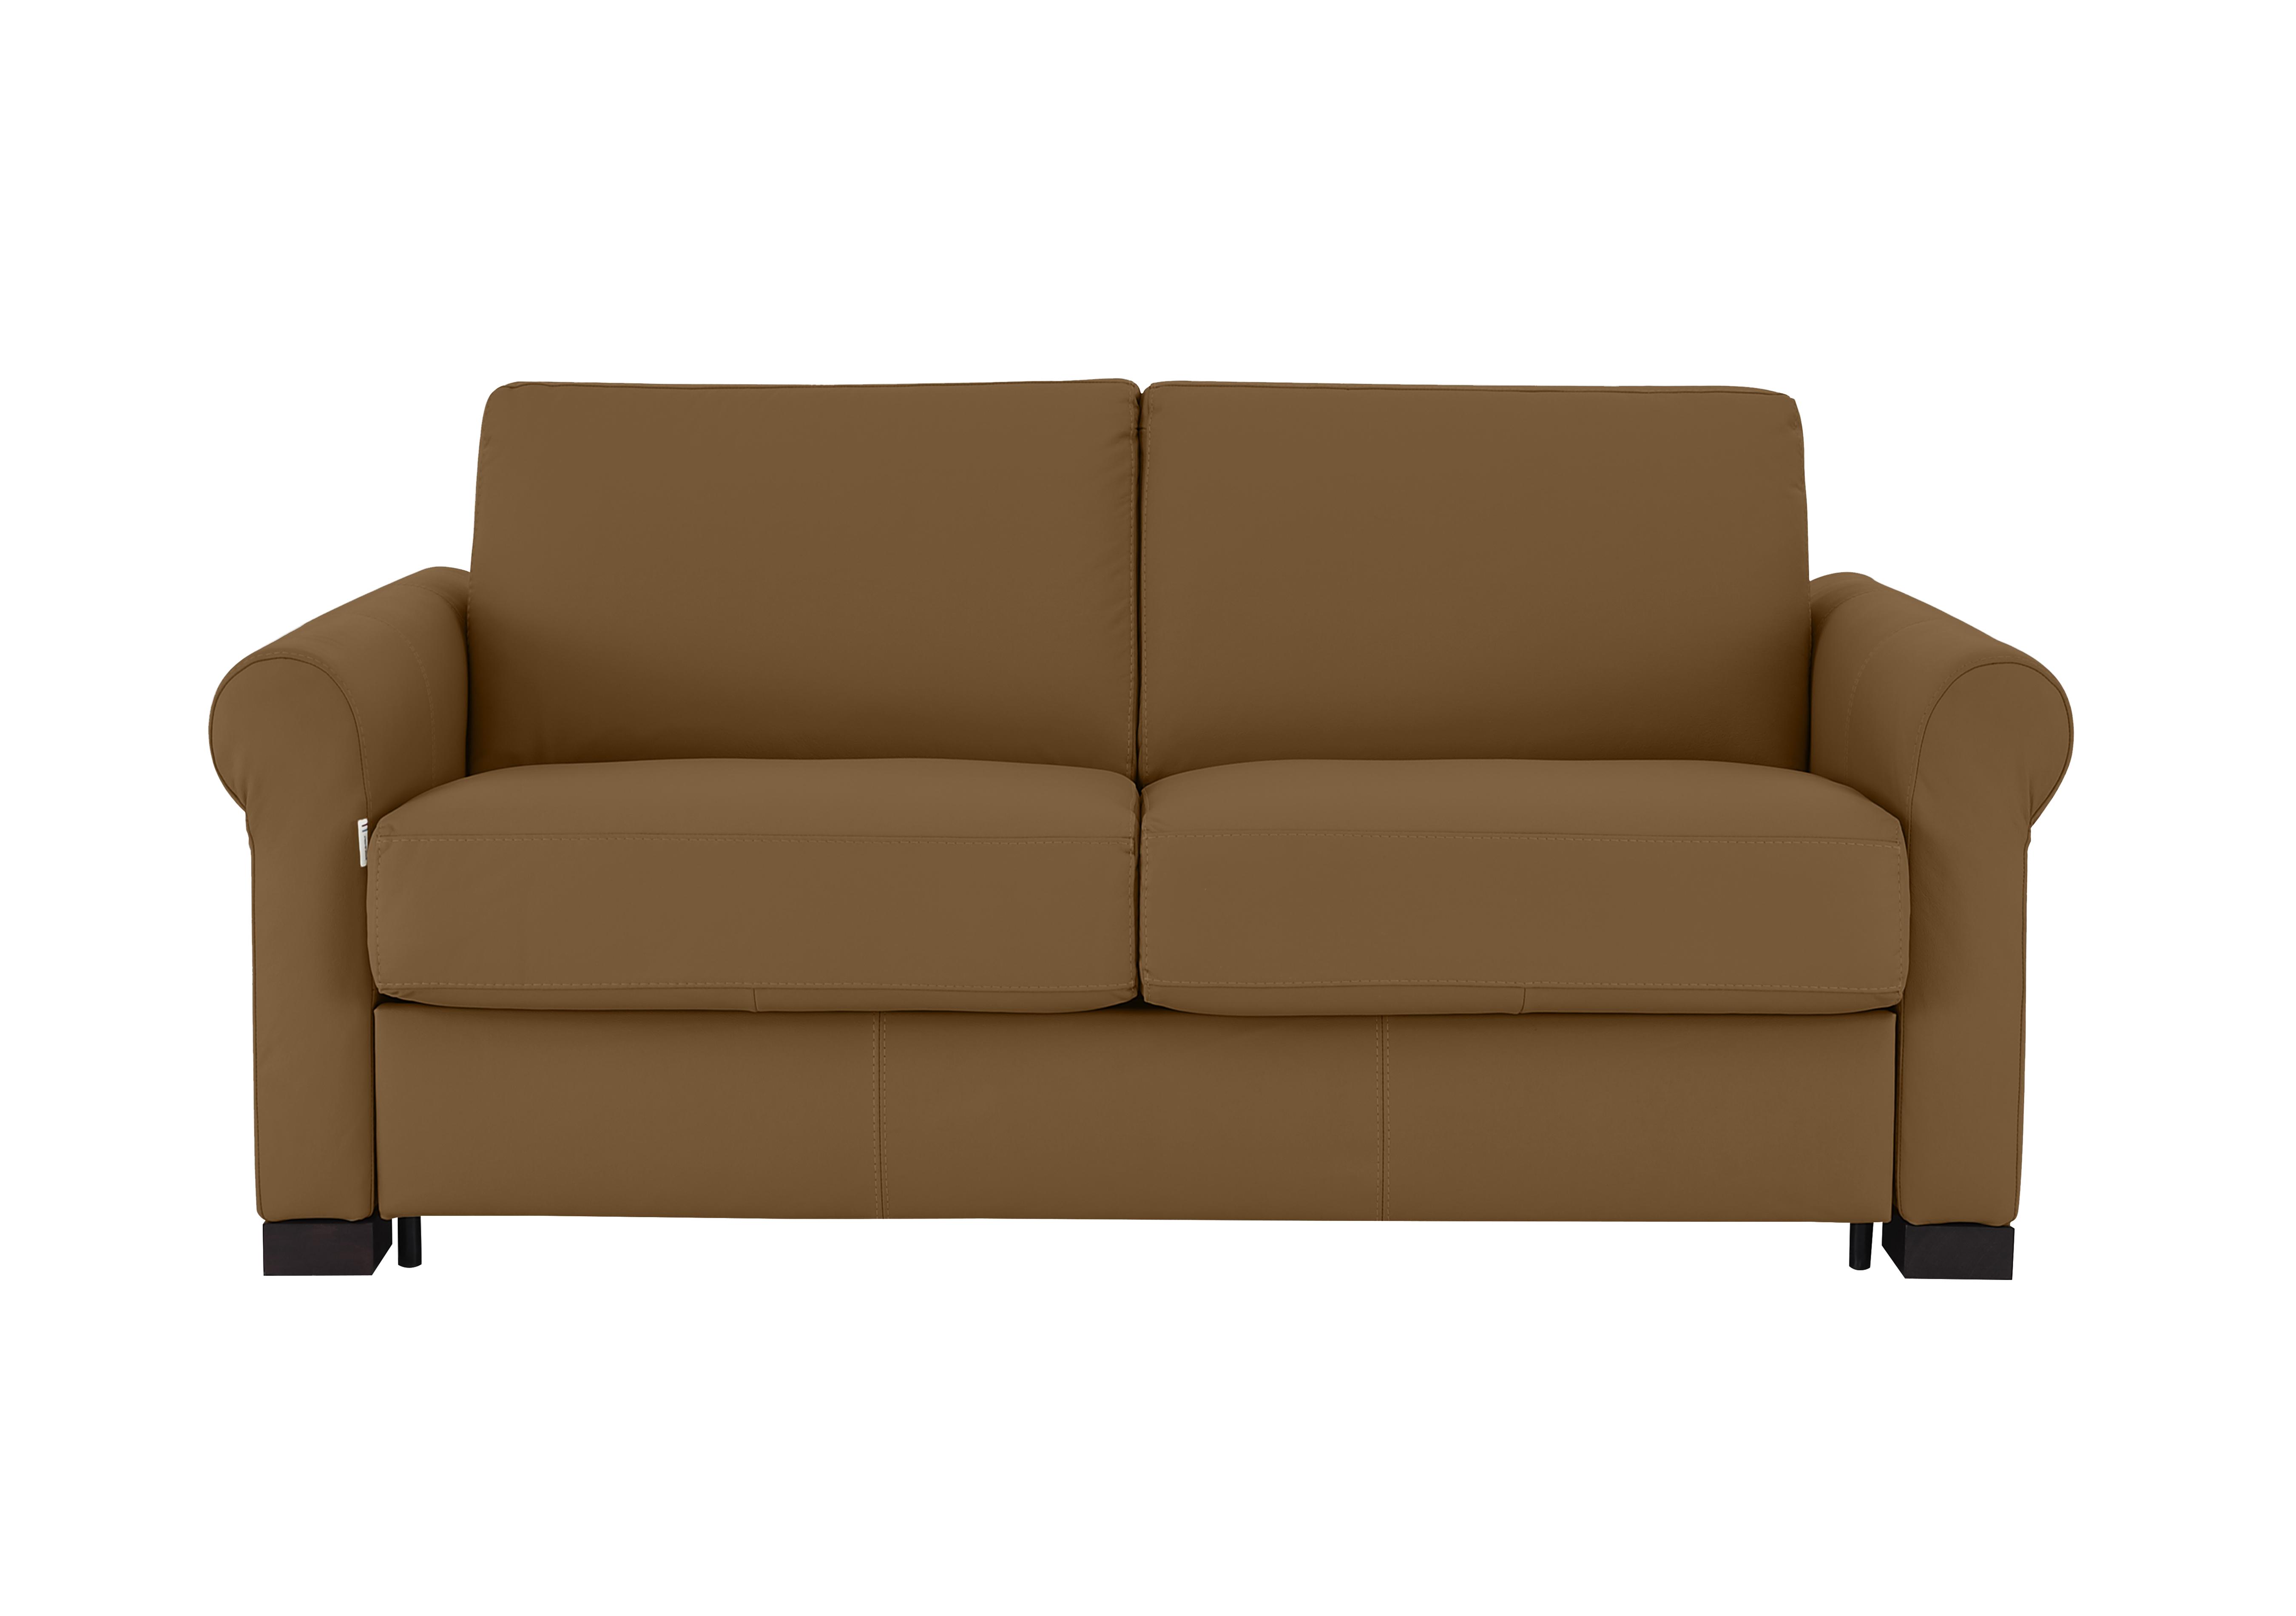 Alcova 2 Seater Leather Sofa Bed with Scroll Arms in Botero Cuoio 2151 on Furniture Village